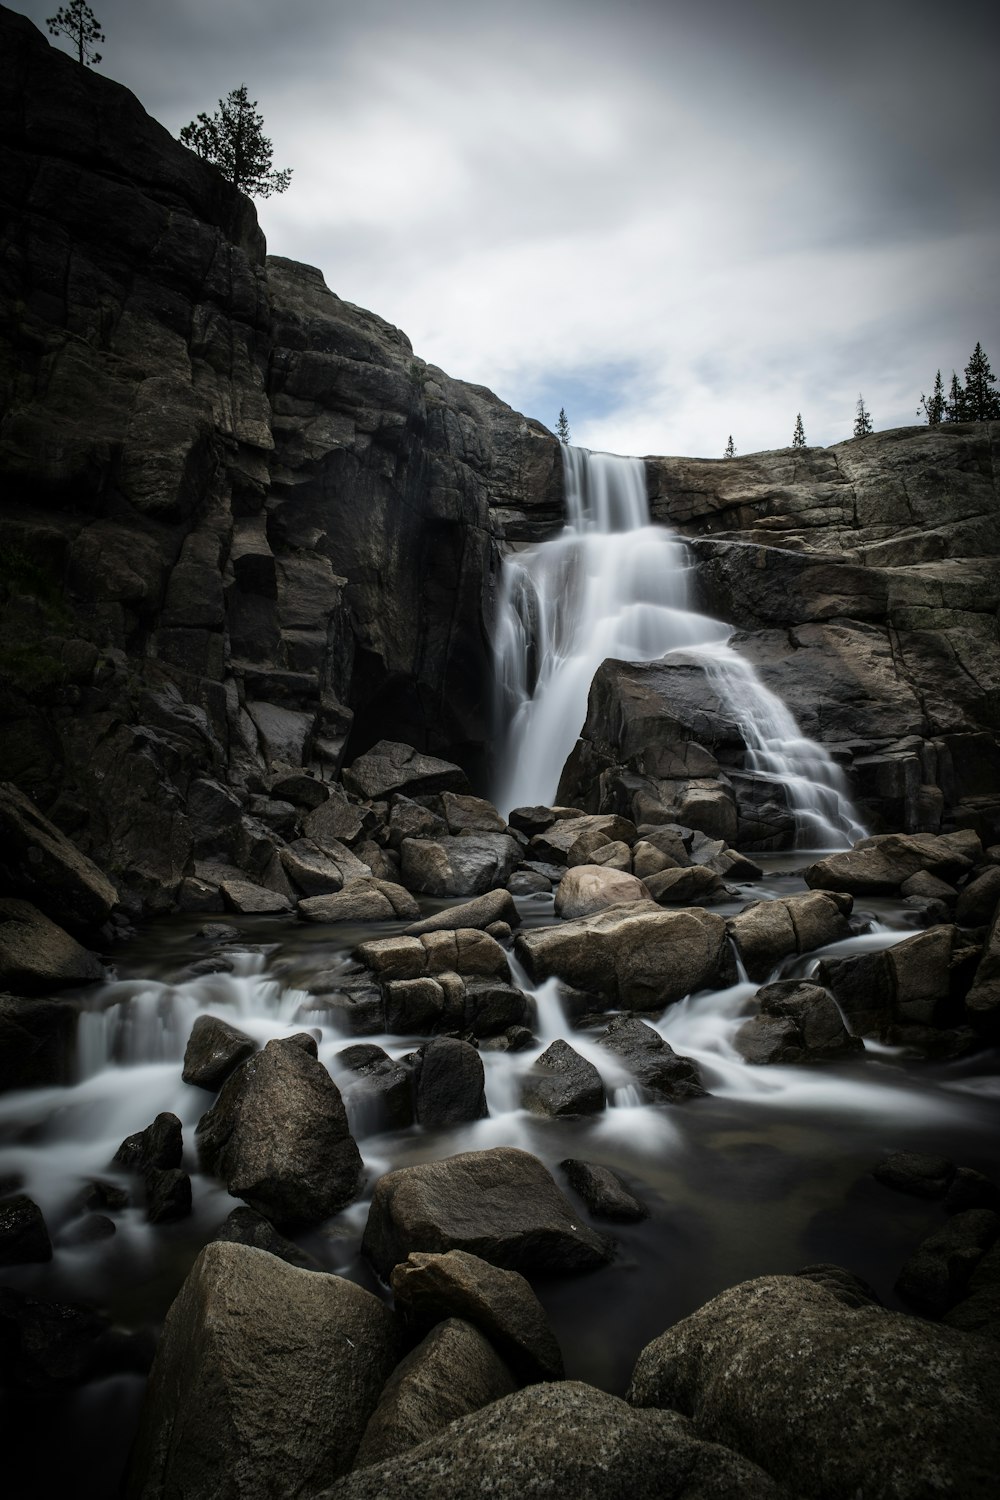 waterfalls on rocky mountain under cloudy sky during daytime